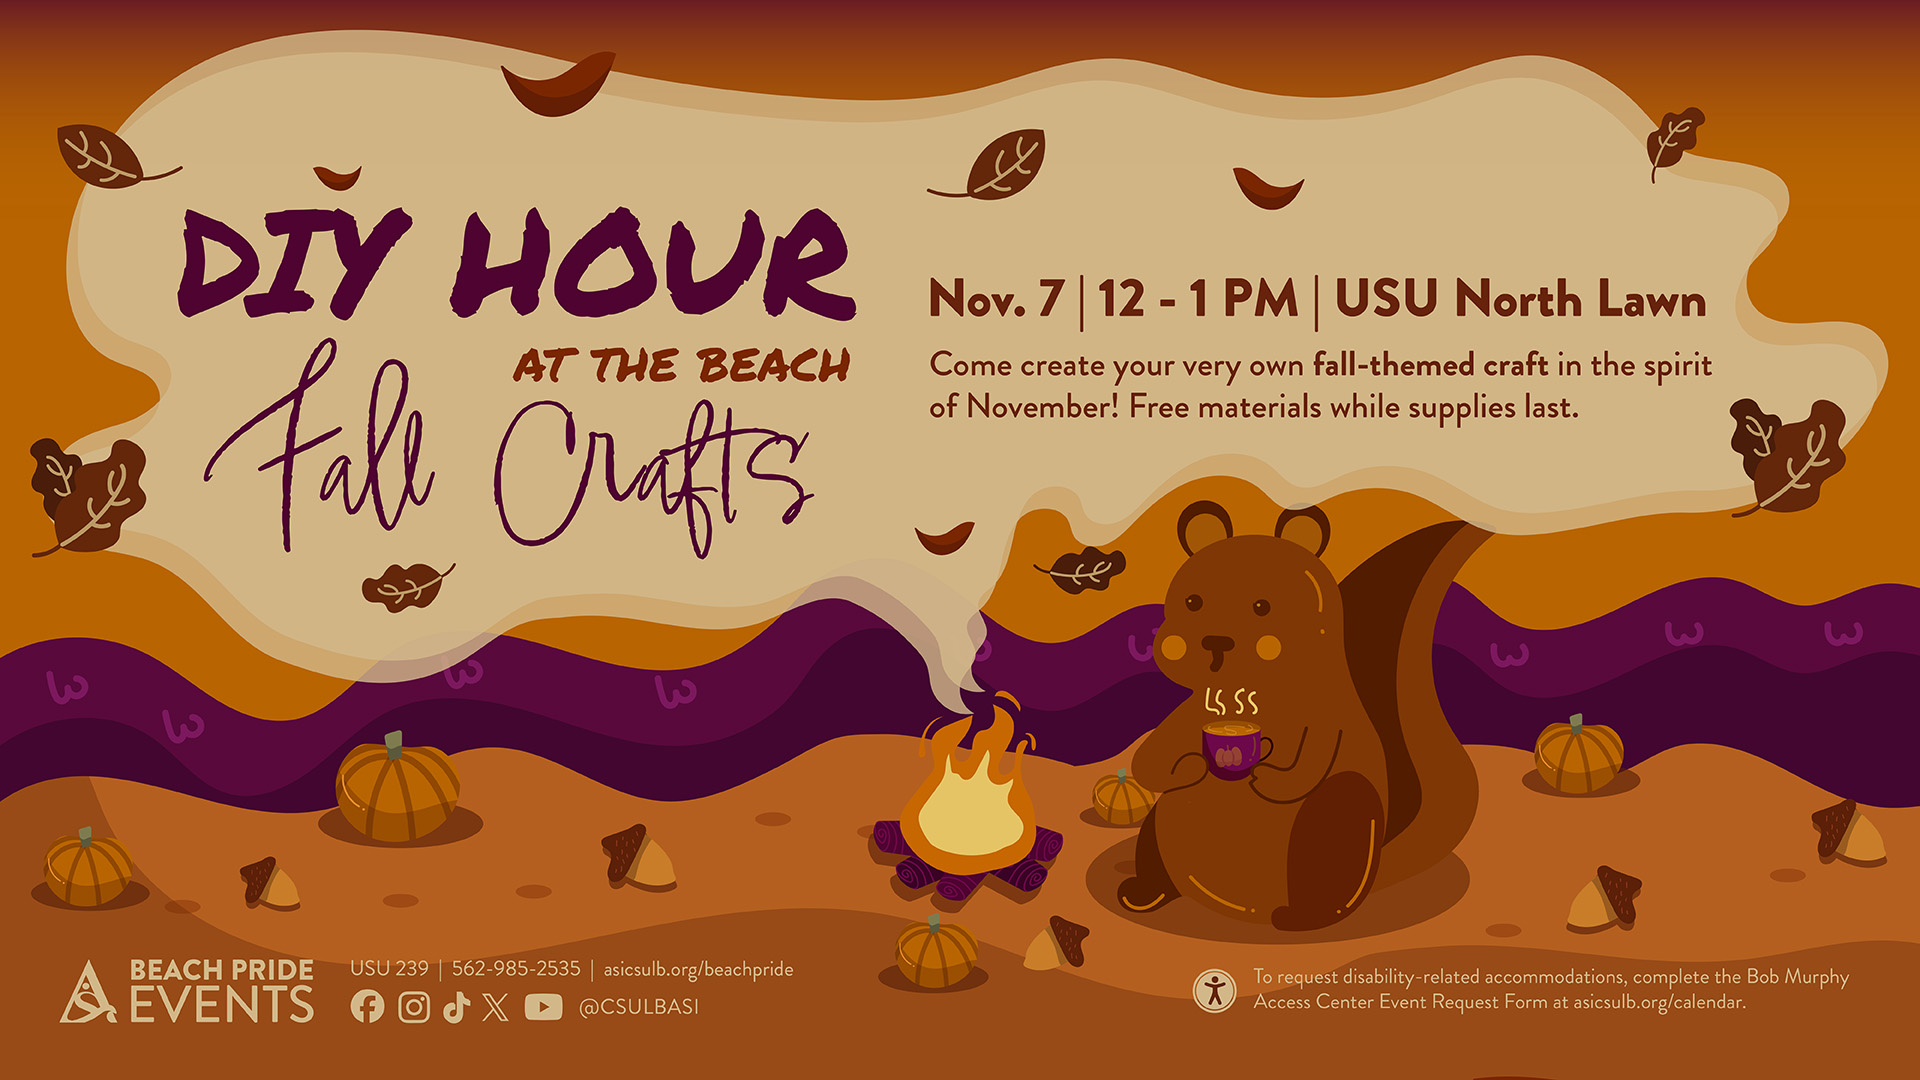 DIY Hour at the Beach - Fall Crafts